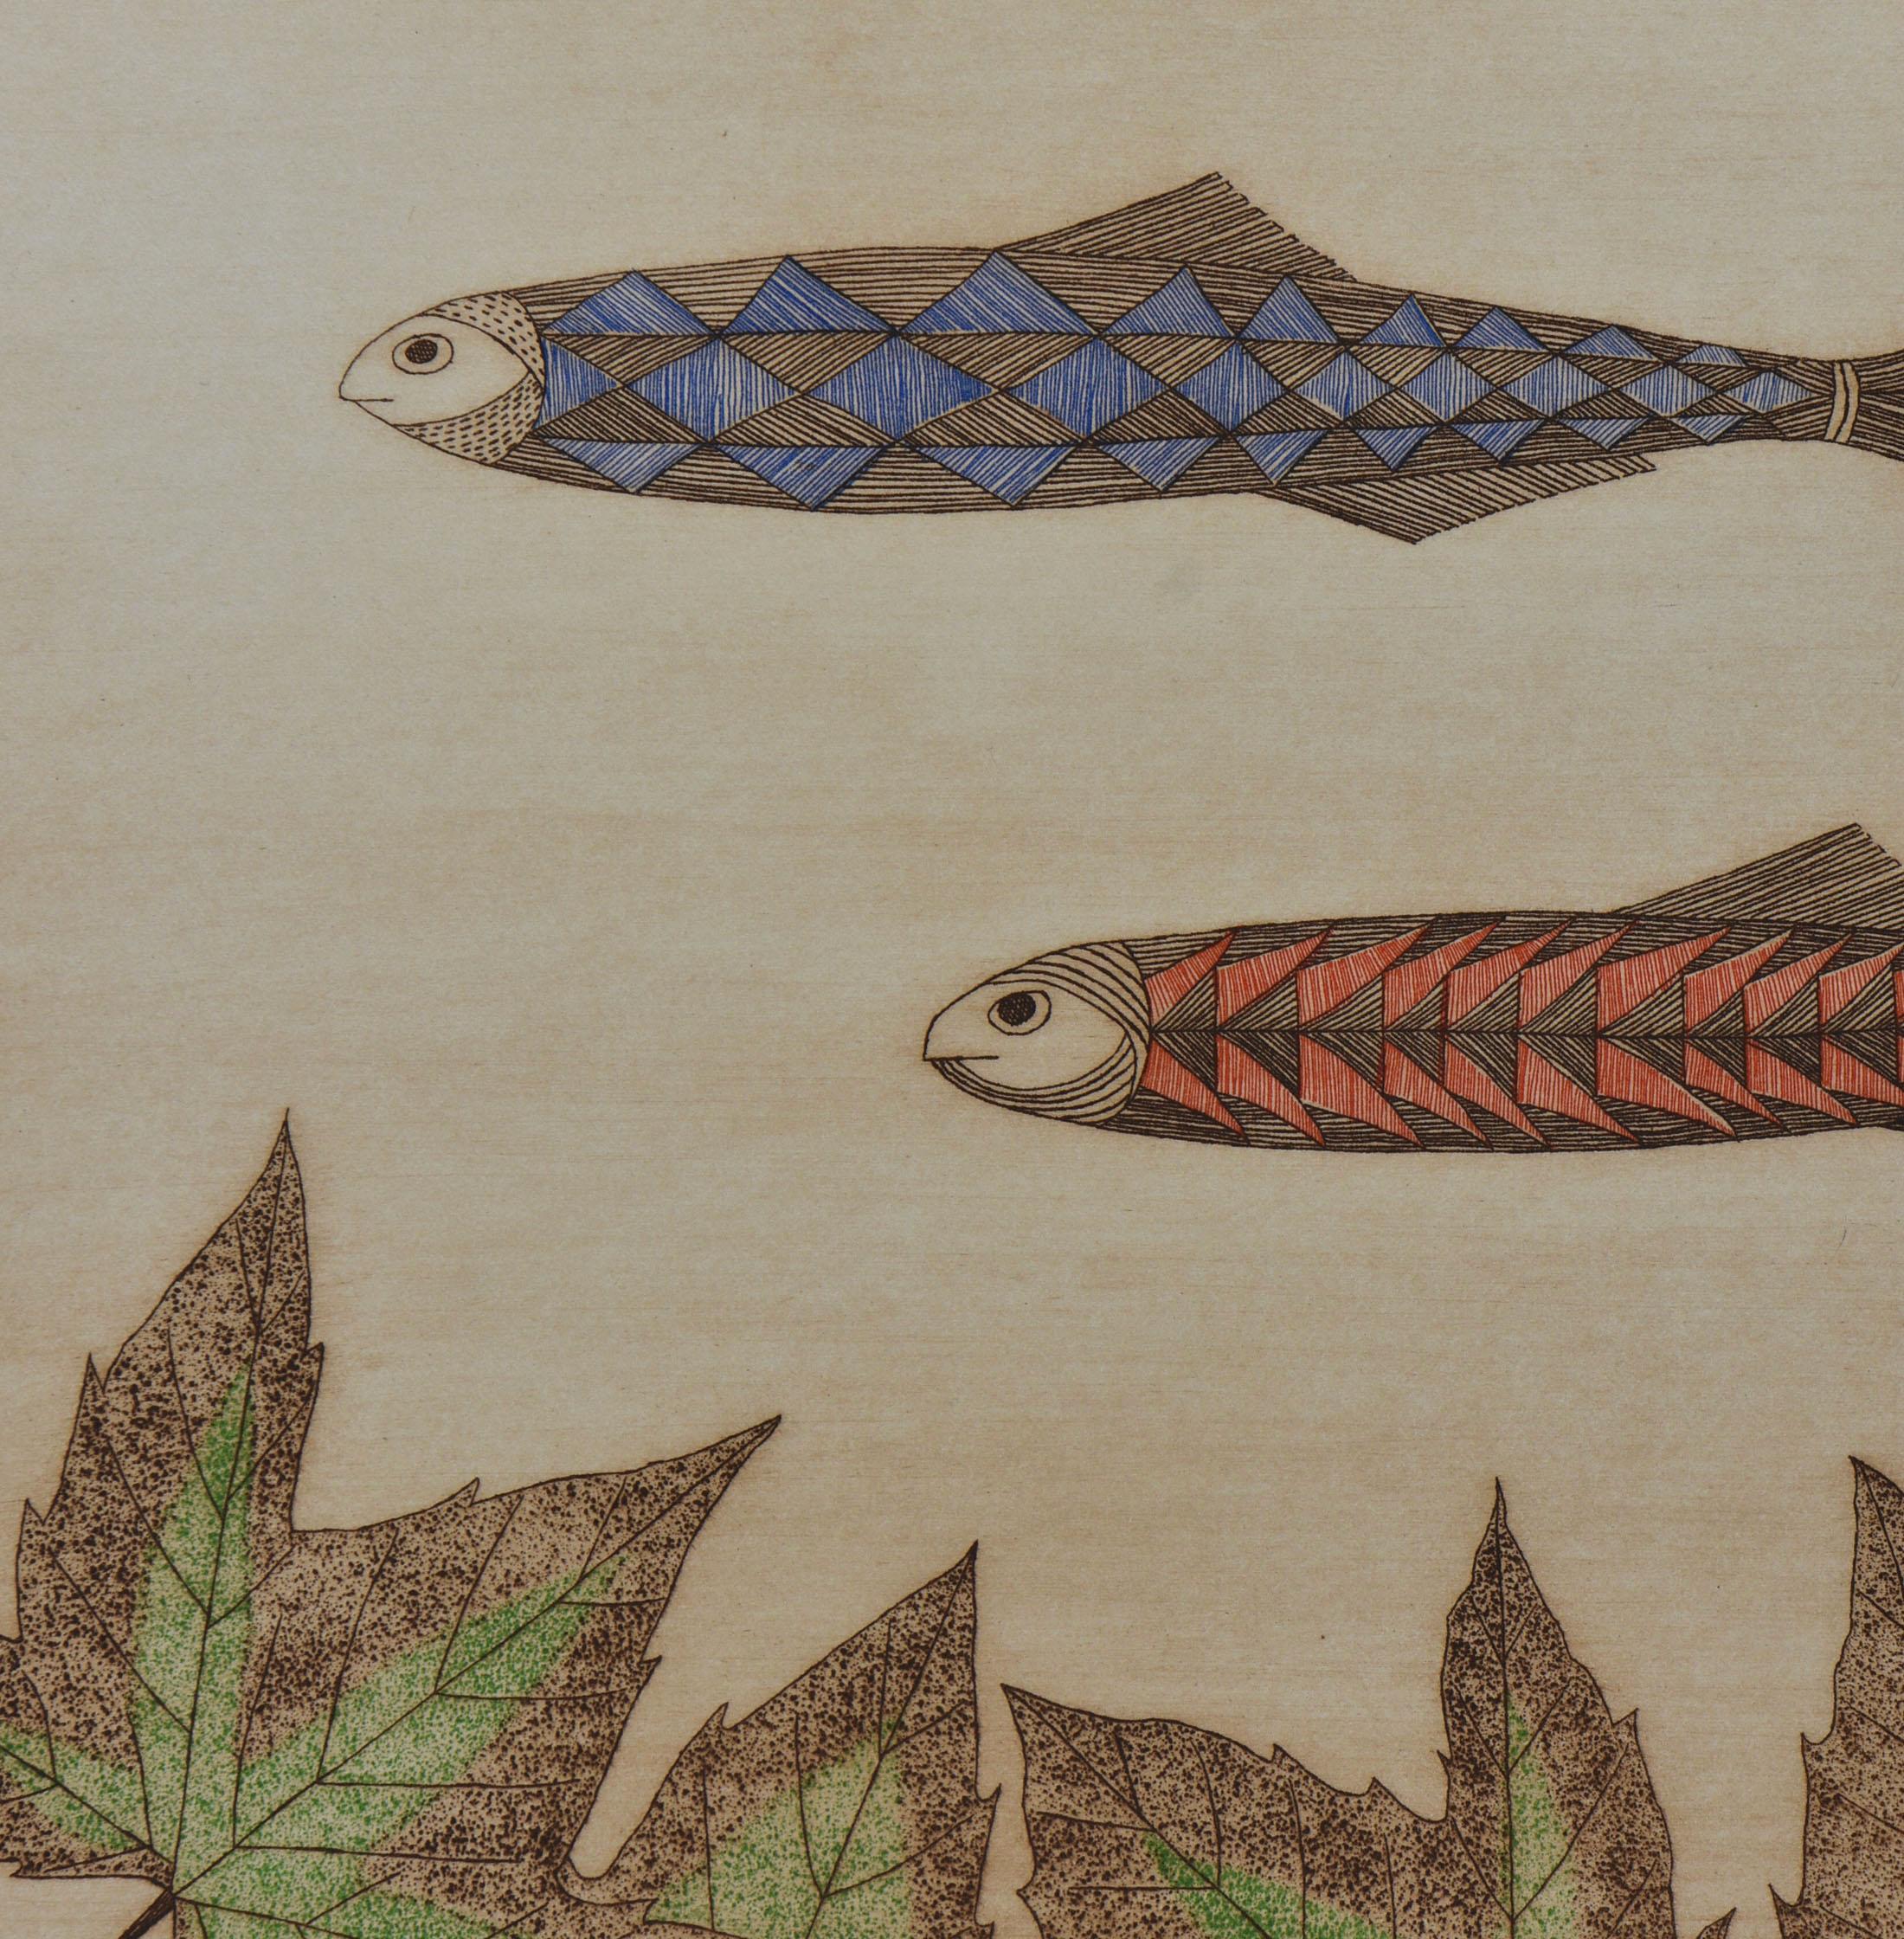 Keiko Minami, 1911-2004 - 'Fishes' Aquatint On BFK Rives Wove. Signed and numbered 41/75 in pencil. Circa 1977.

Delivery is INCLUDED for all areas in MAINLAND UK via a selected parcel company.

Japanese artist, aquatint engraver, and poet,